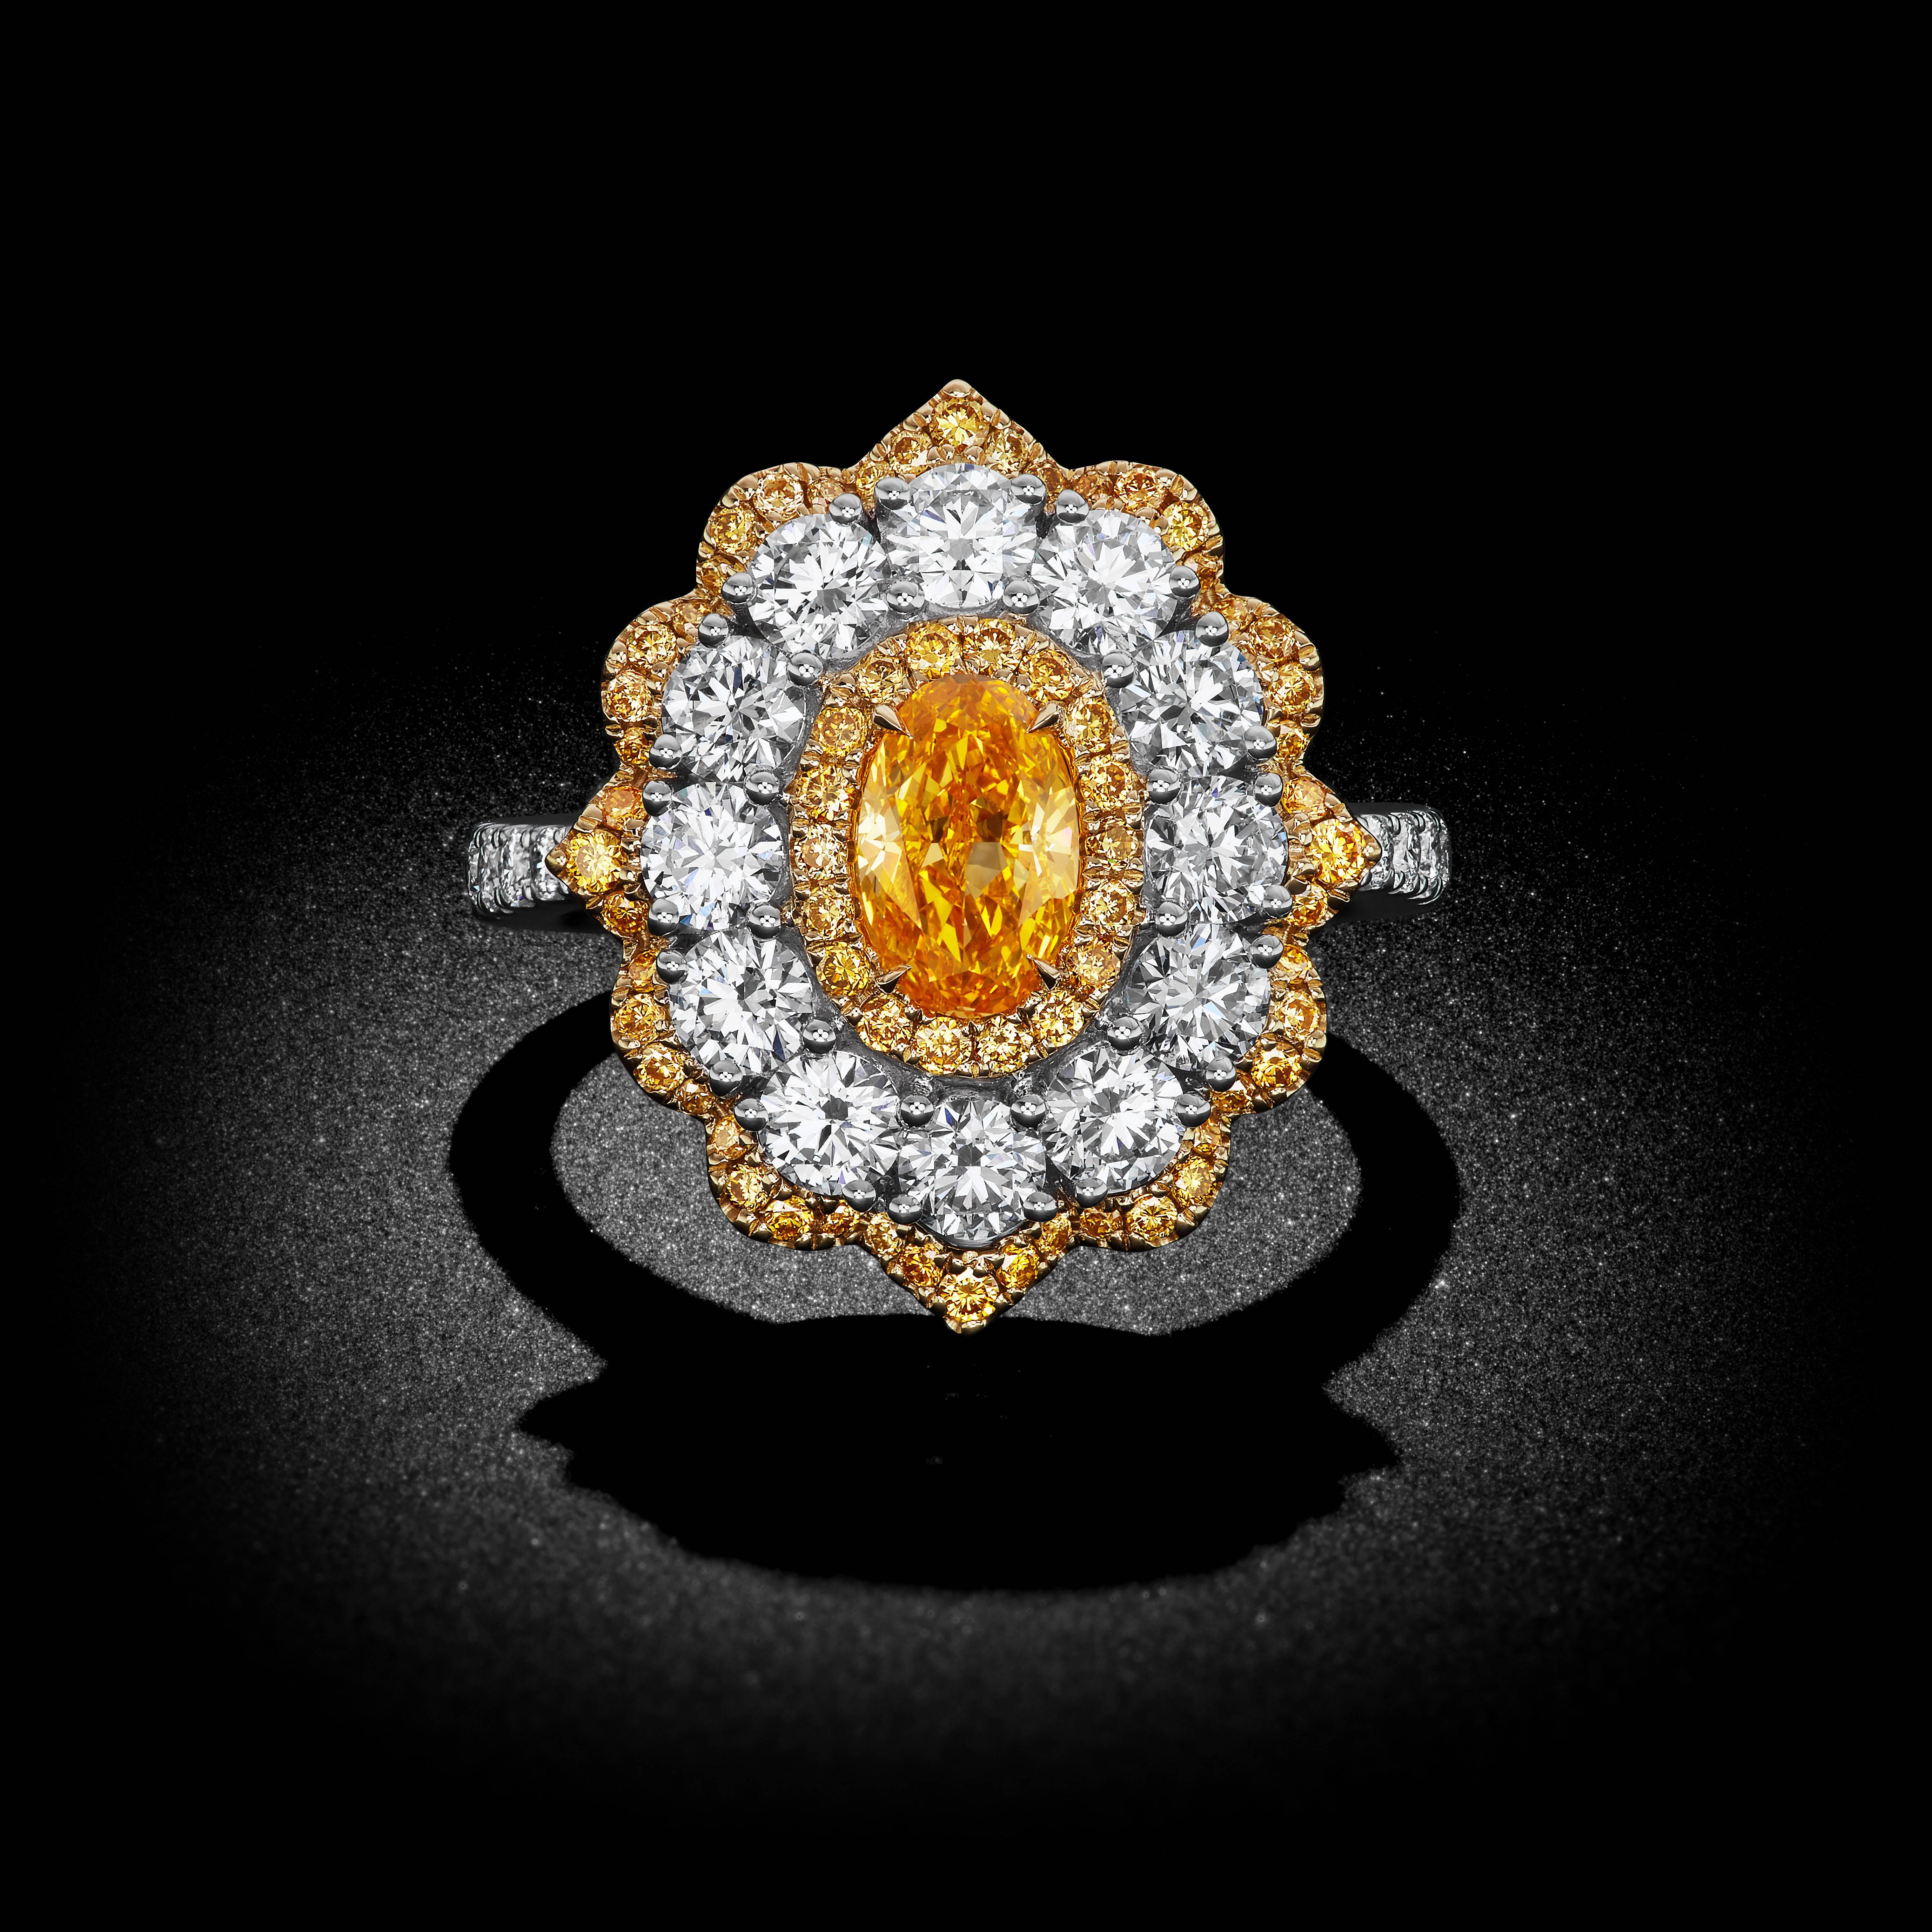 This astounding masterpiece gleams with a resounding display of color and brilliance. And incredibly rare Fancy Intense Yellow Orange oval diamond rests within a bright unfurling flower. Over 2 carats of white and yellow round brilliant diamonds